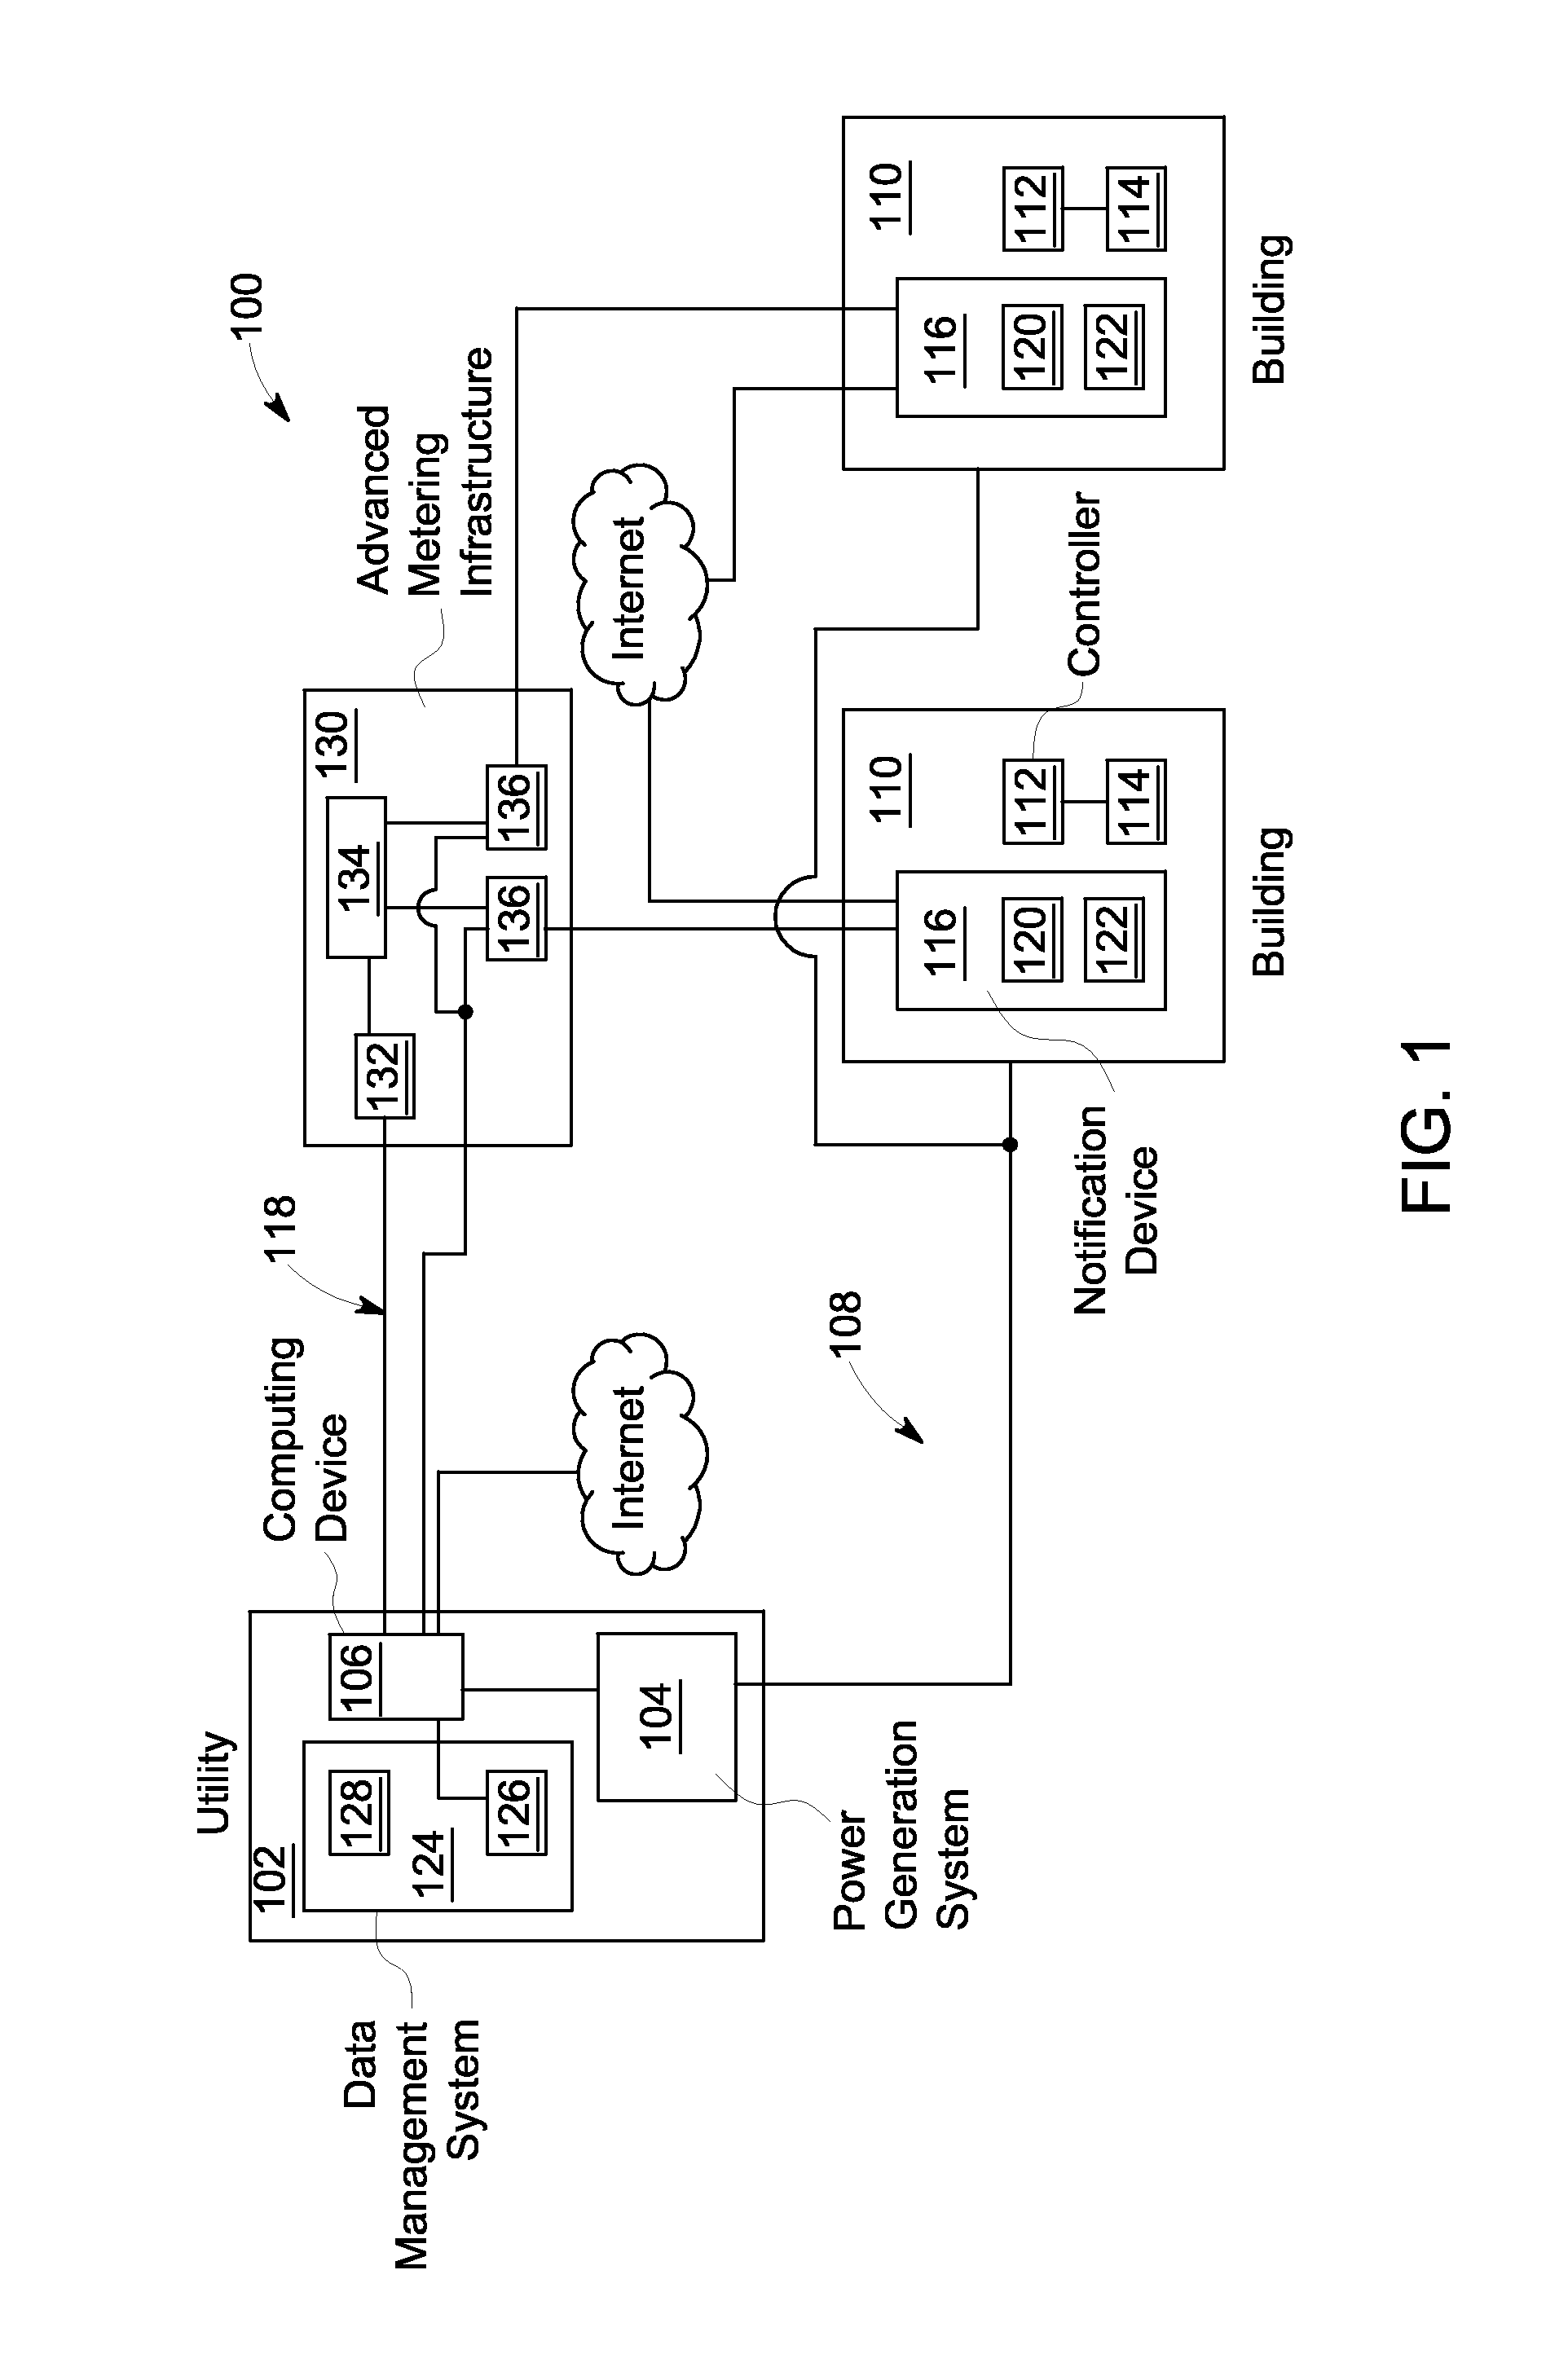 Aggregate load management at a system level